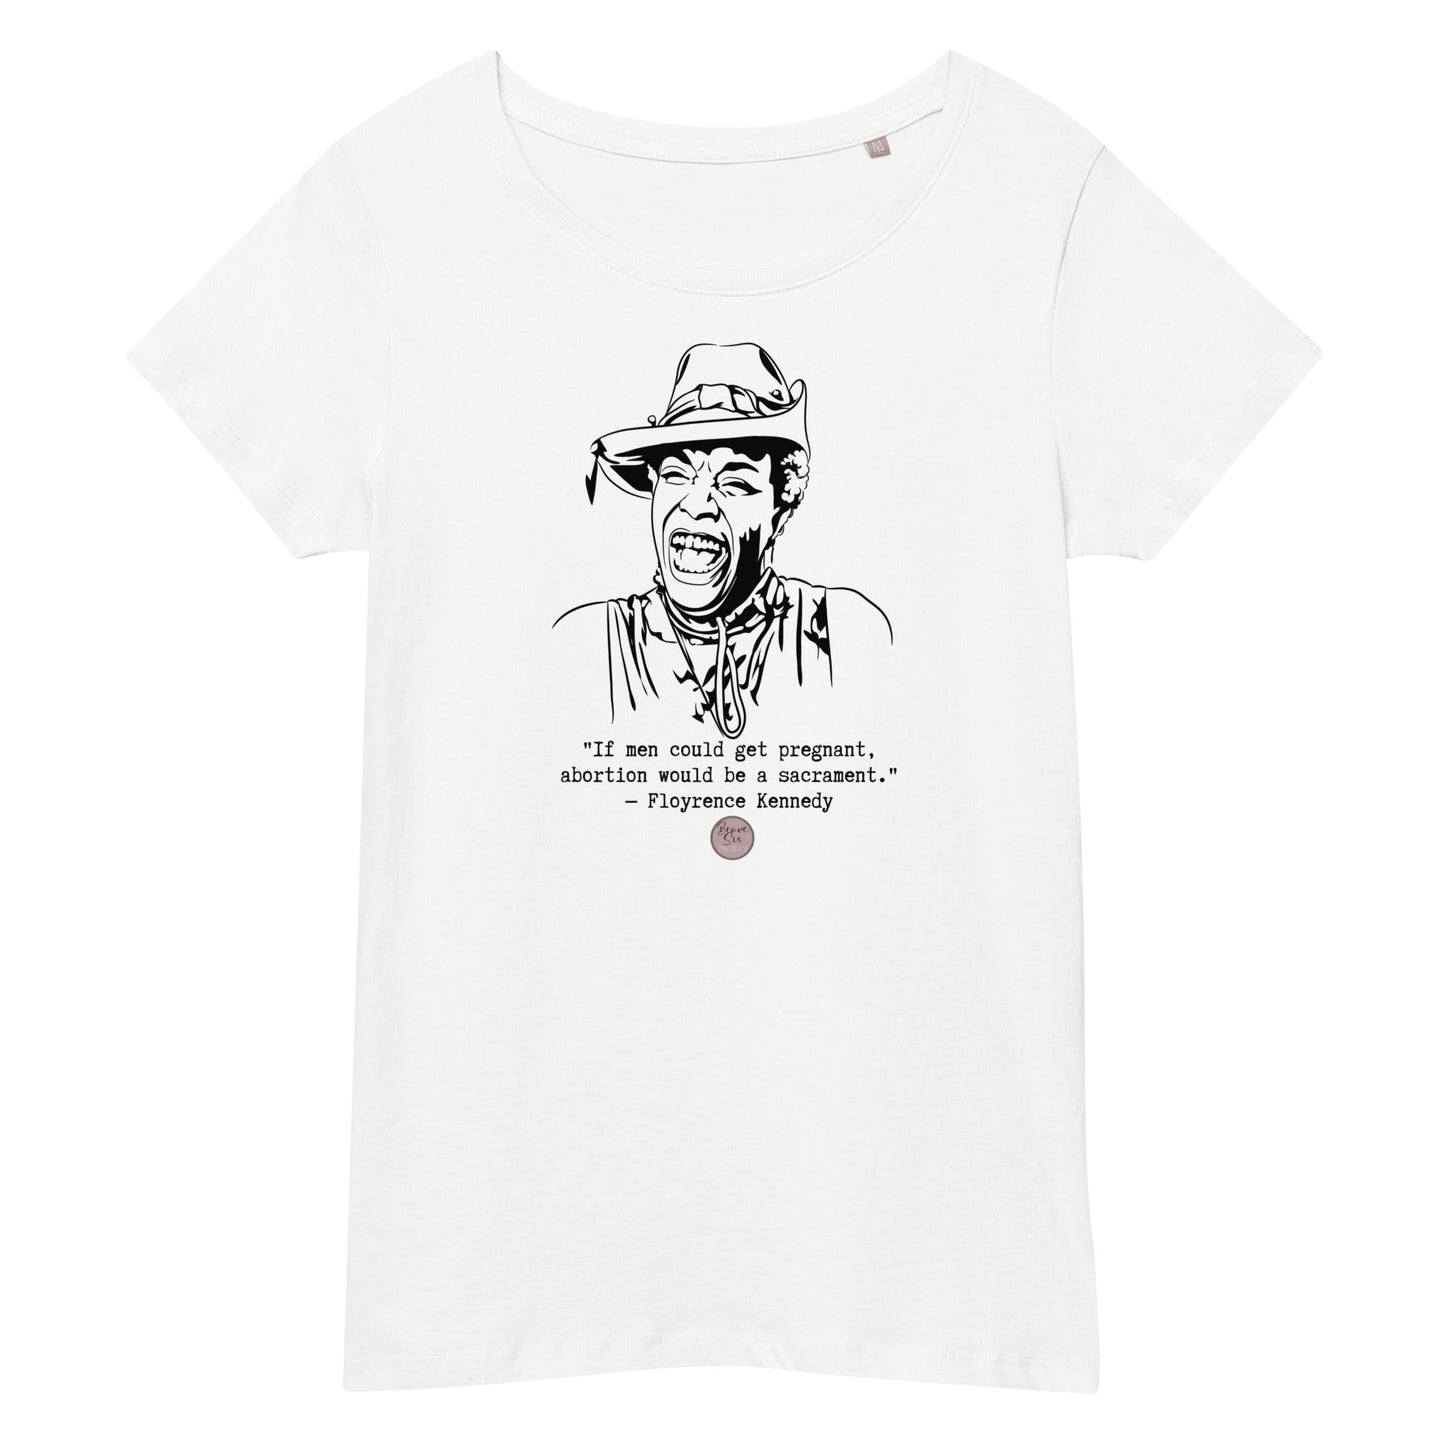 Floyrence Kennedy "If Men Could Get Pregnant" organic t-shirt